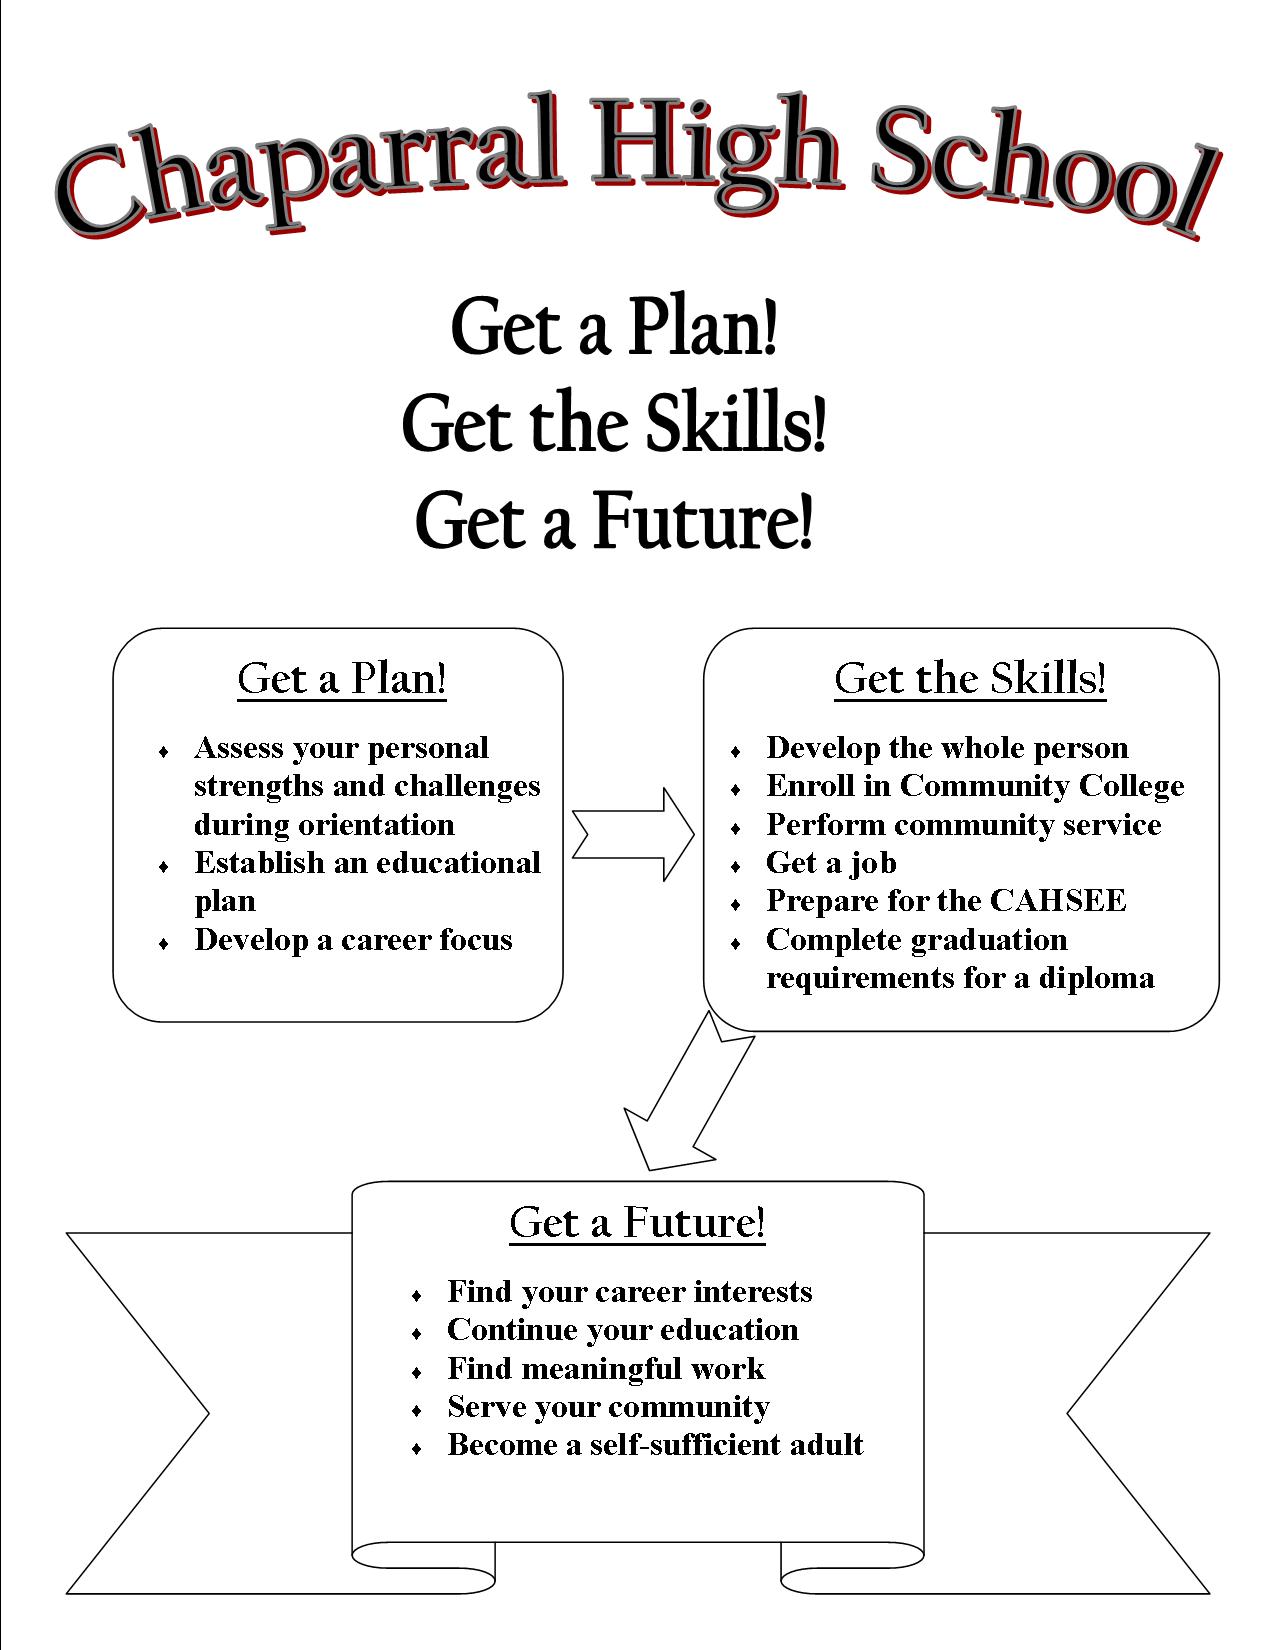 Chaparral High School, Get a Plan! Get the Skills! Get a Future!